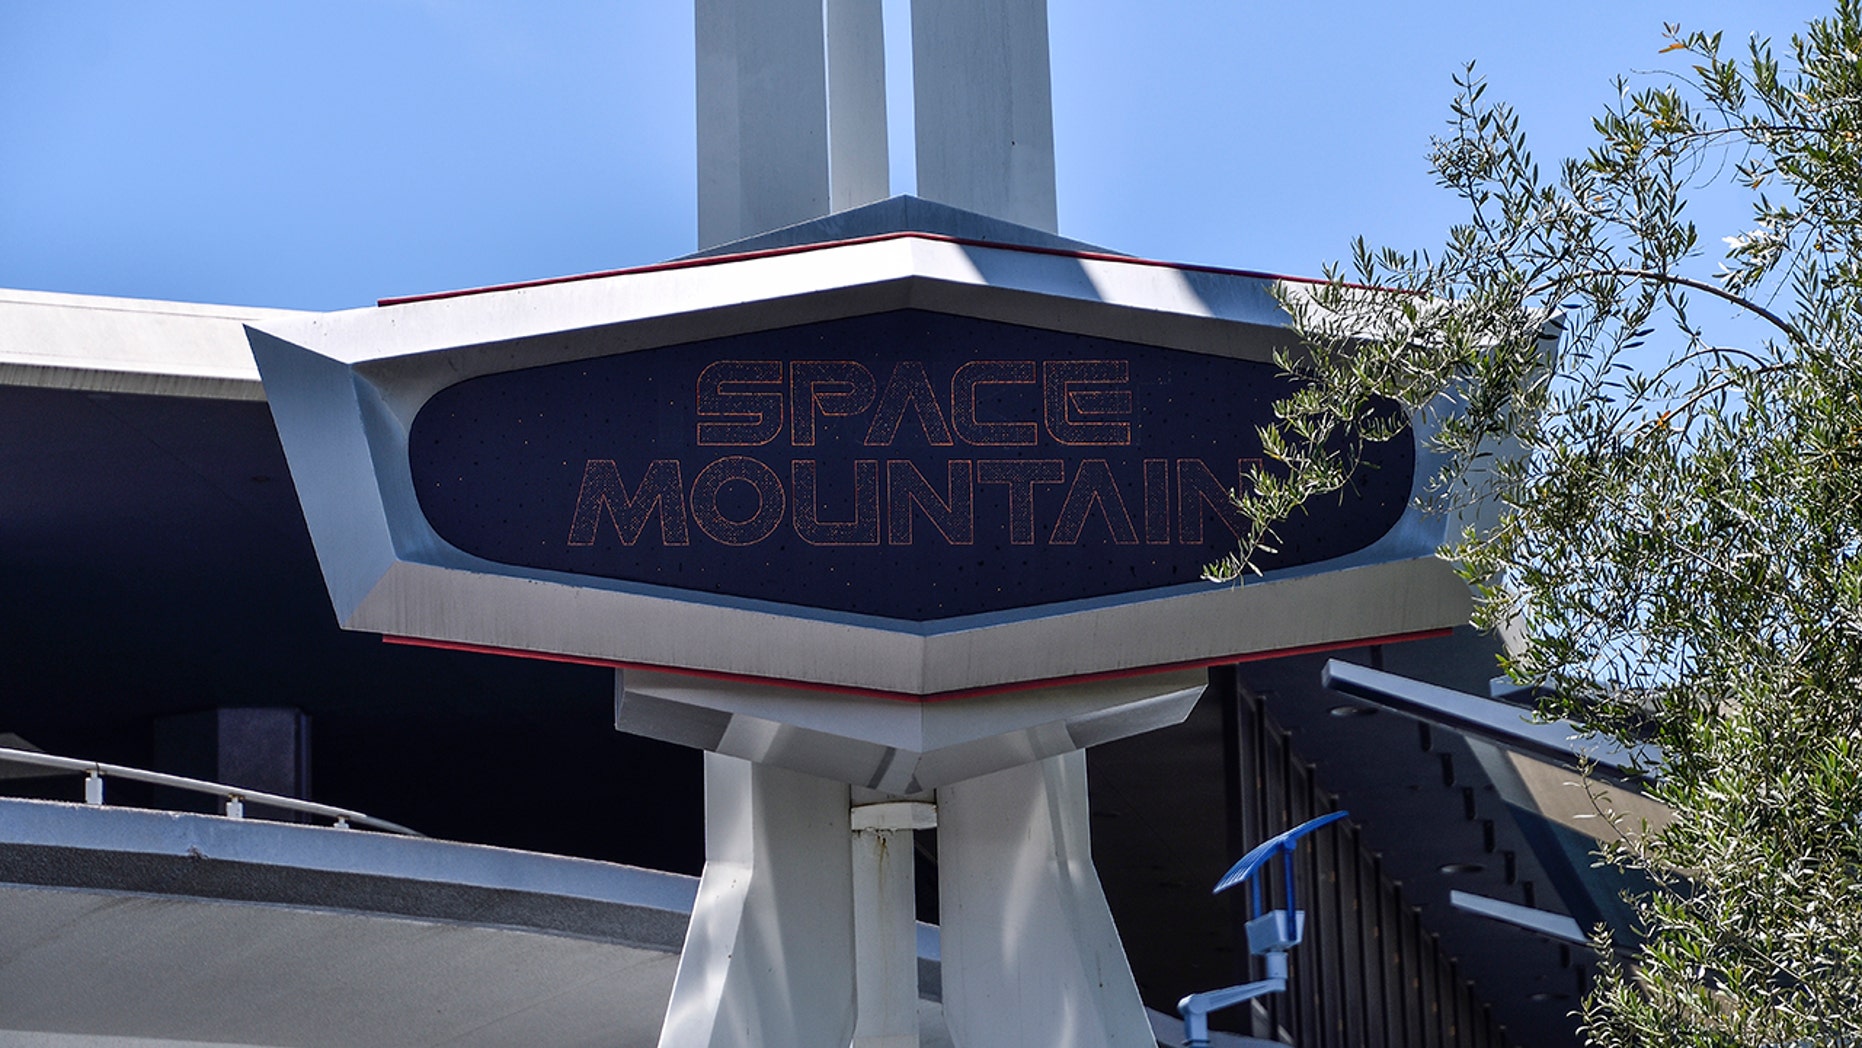 Disneyland closes Space Mountain after visitor jumps off mid-ride